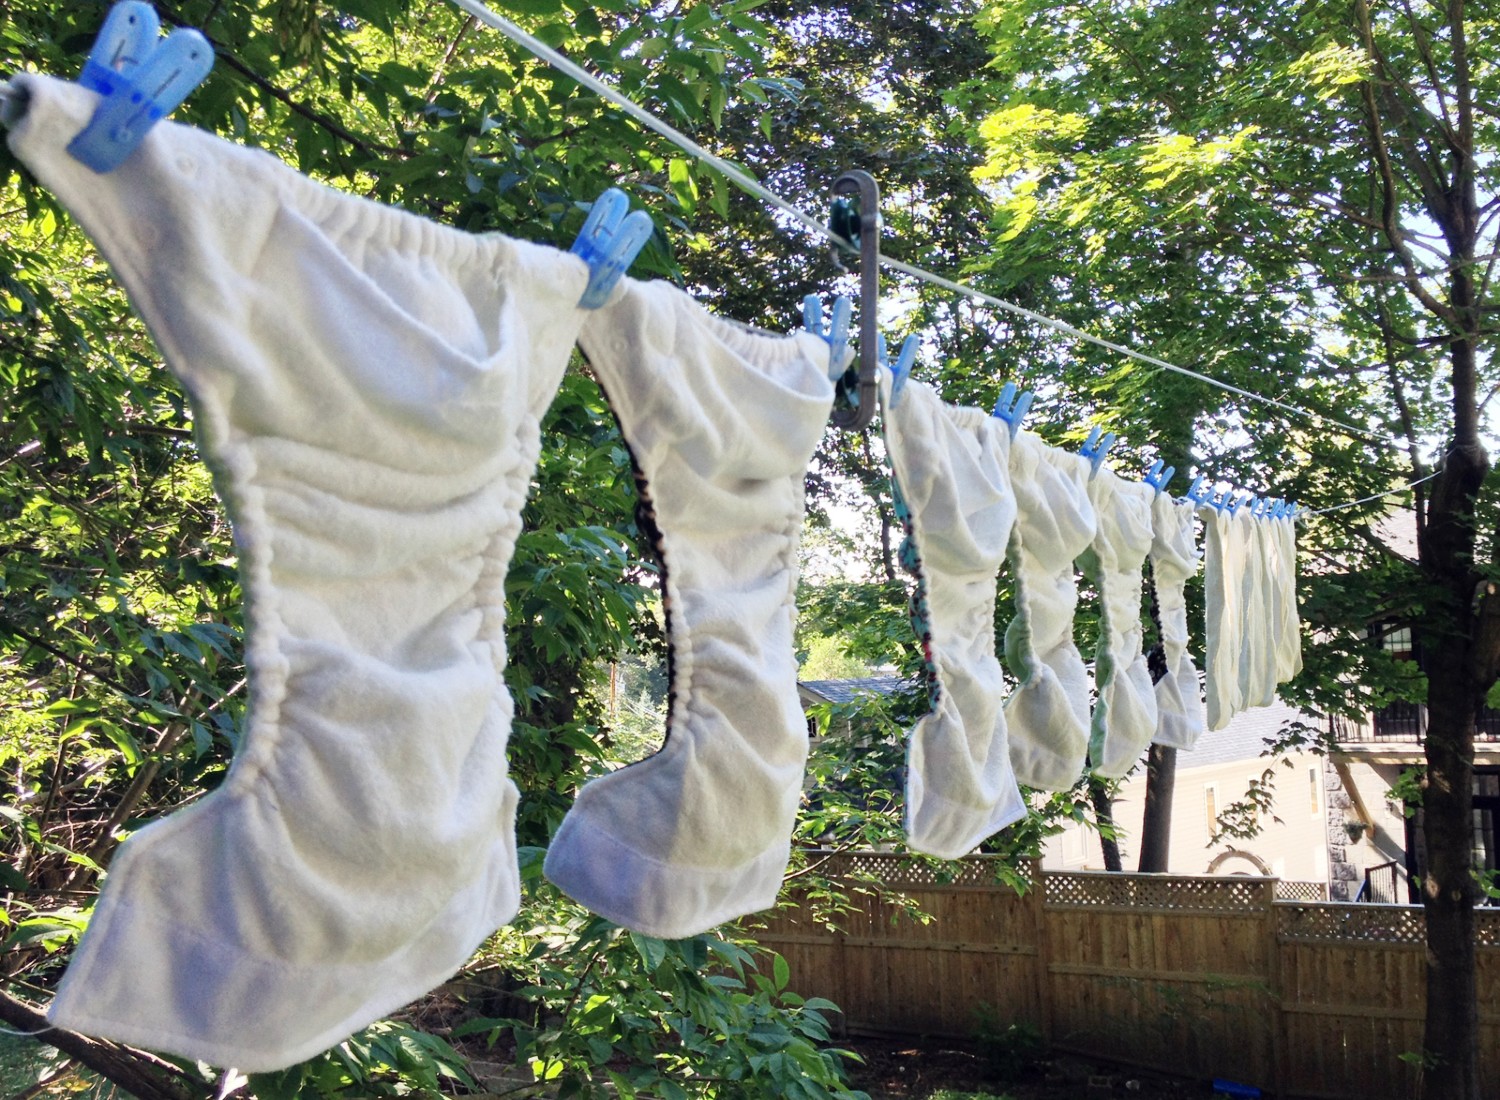 Cloth diapers hanging on a clothes line